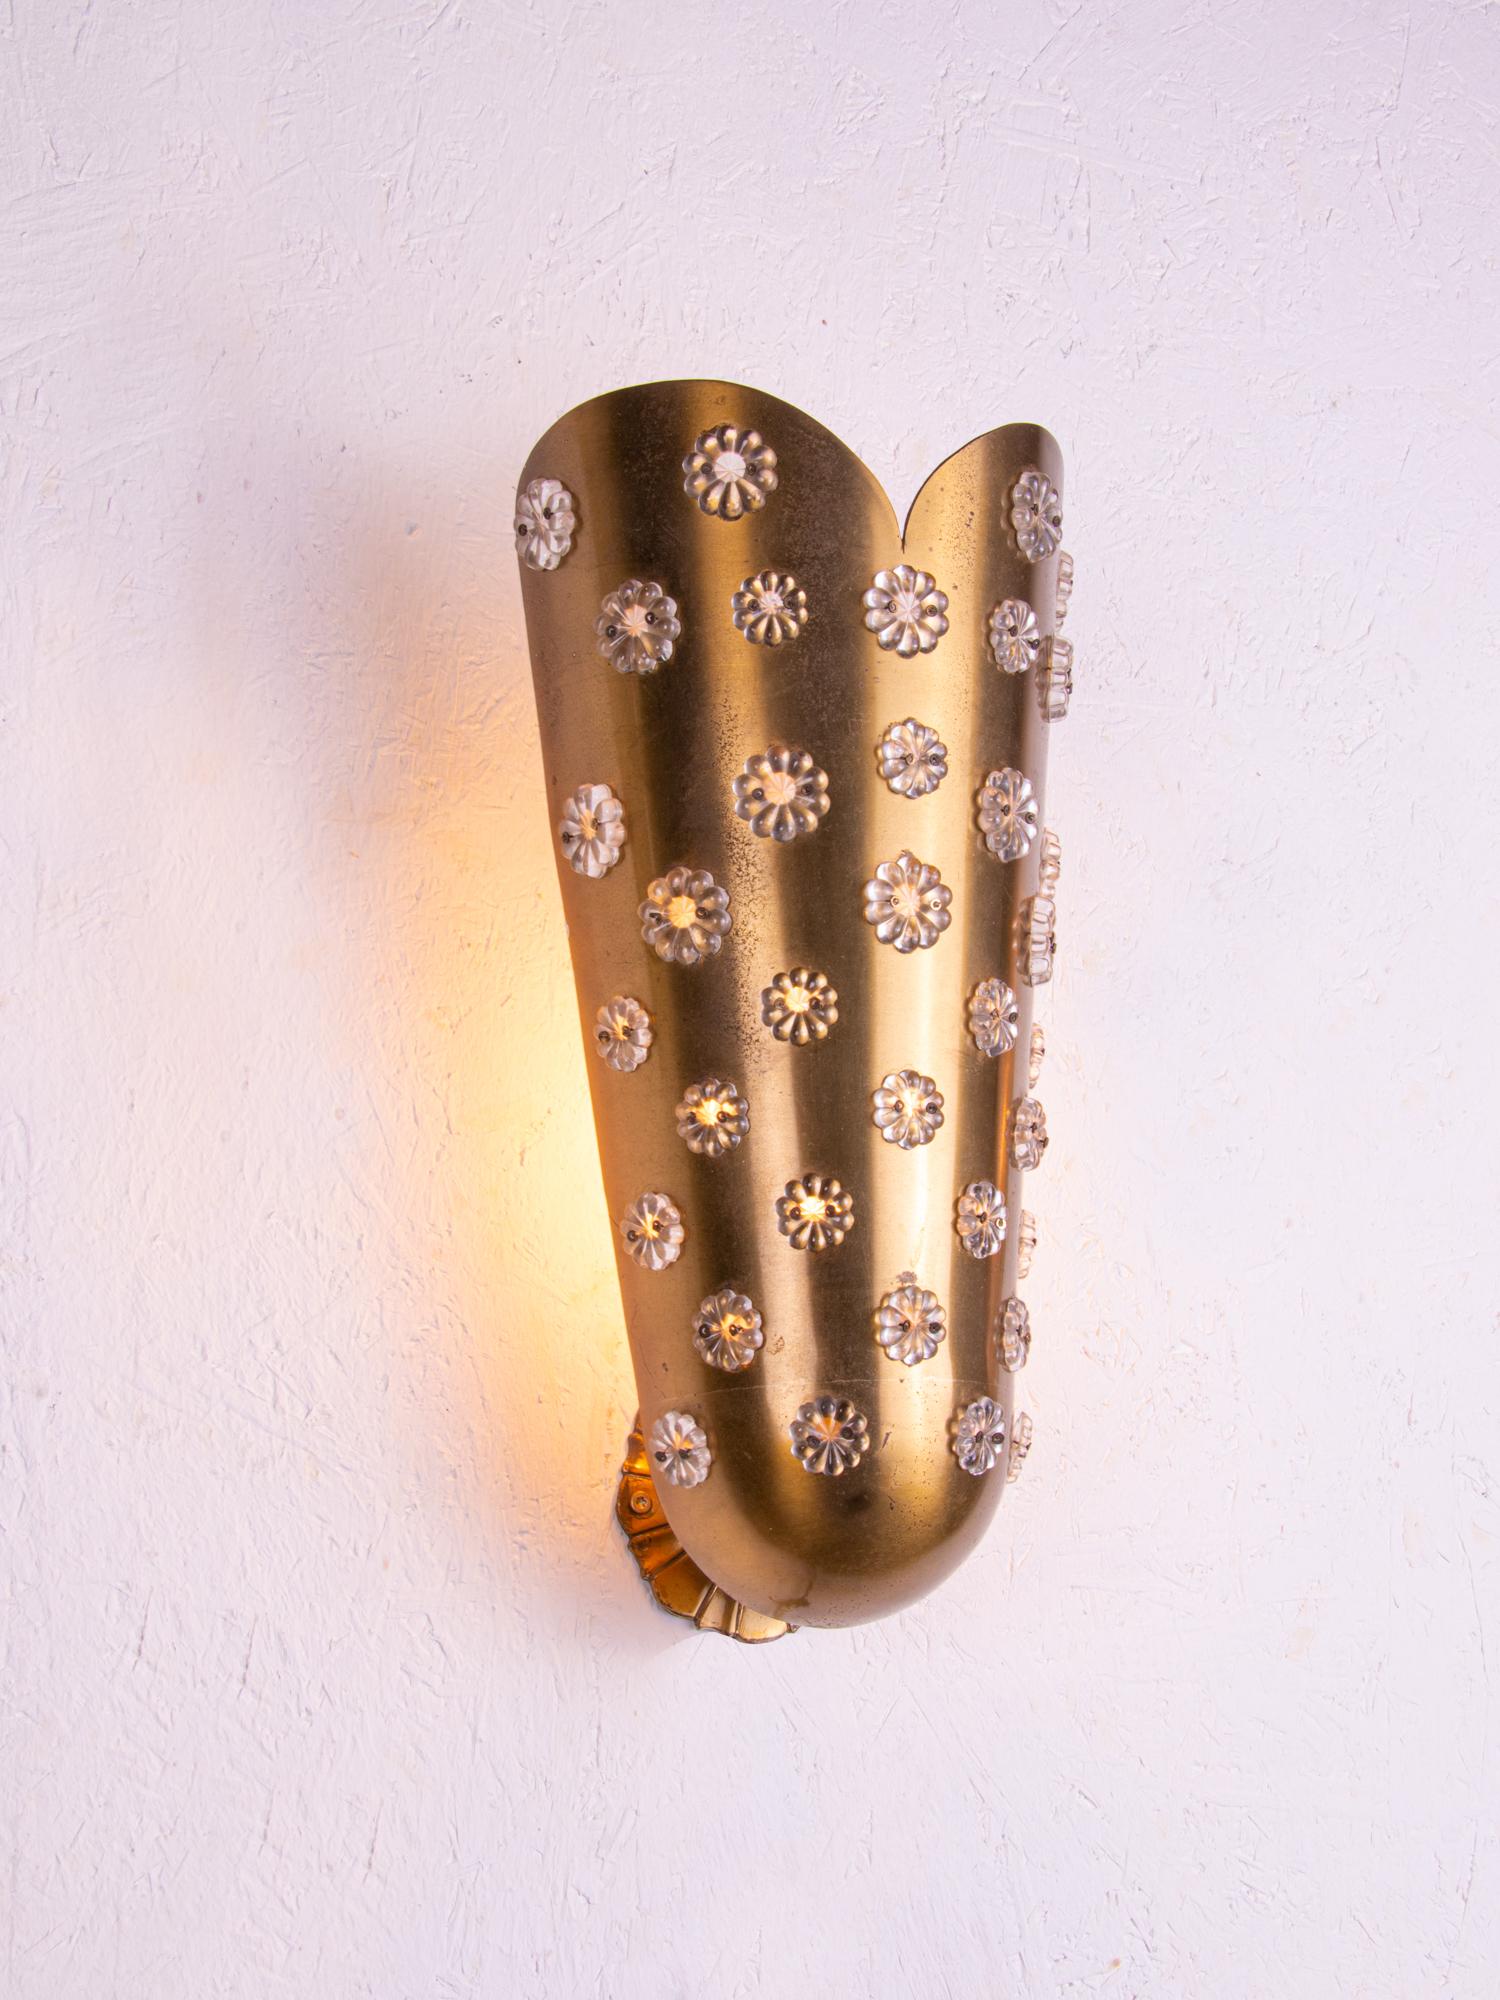 Single Brass Sconce with Crystal Flowers by Emil Stejnar / Nikoll, Vienna, 1950 For Sale 2